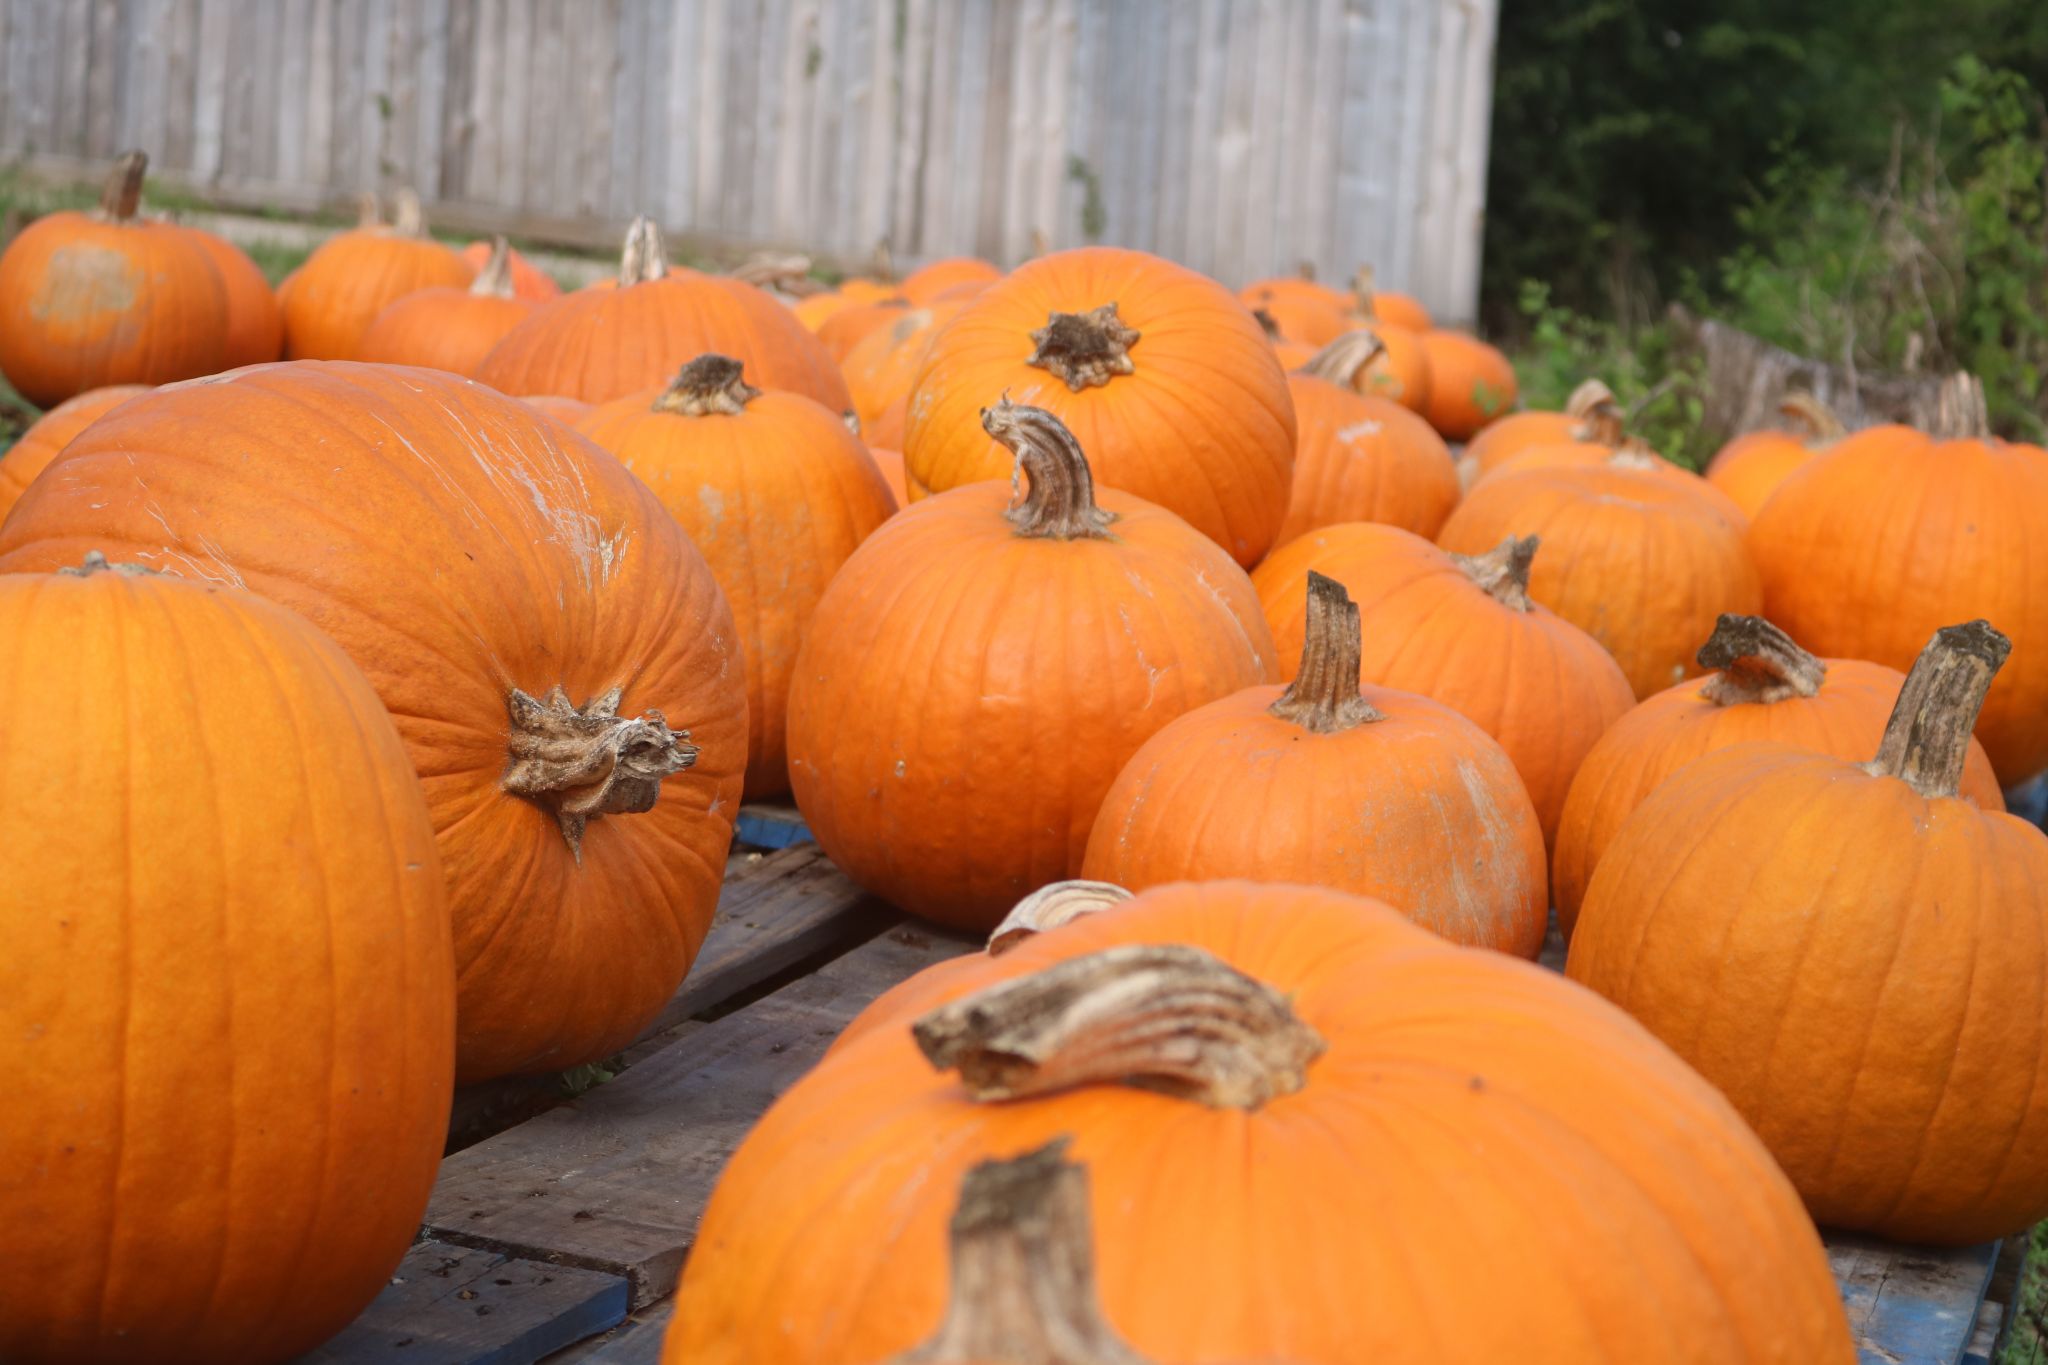 Where to find Houston's best pumpkin patches and fall festivals